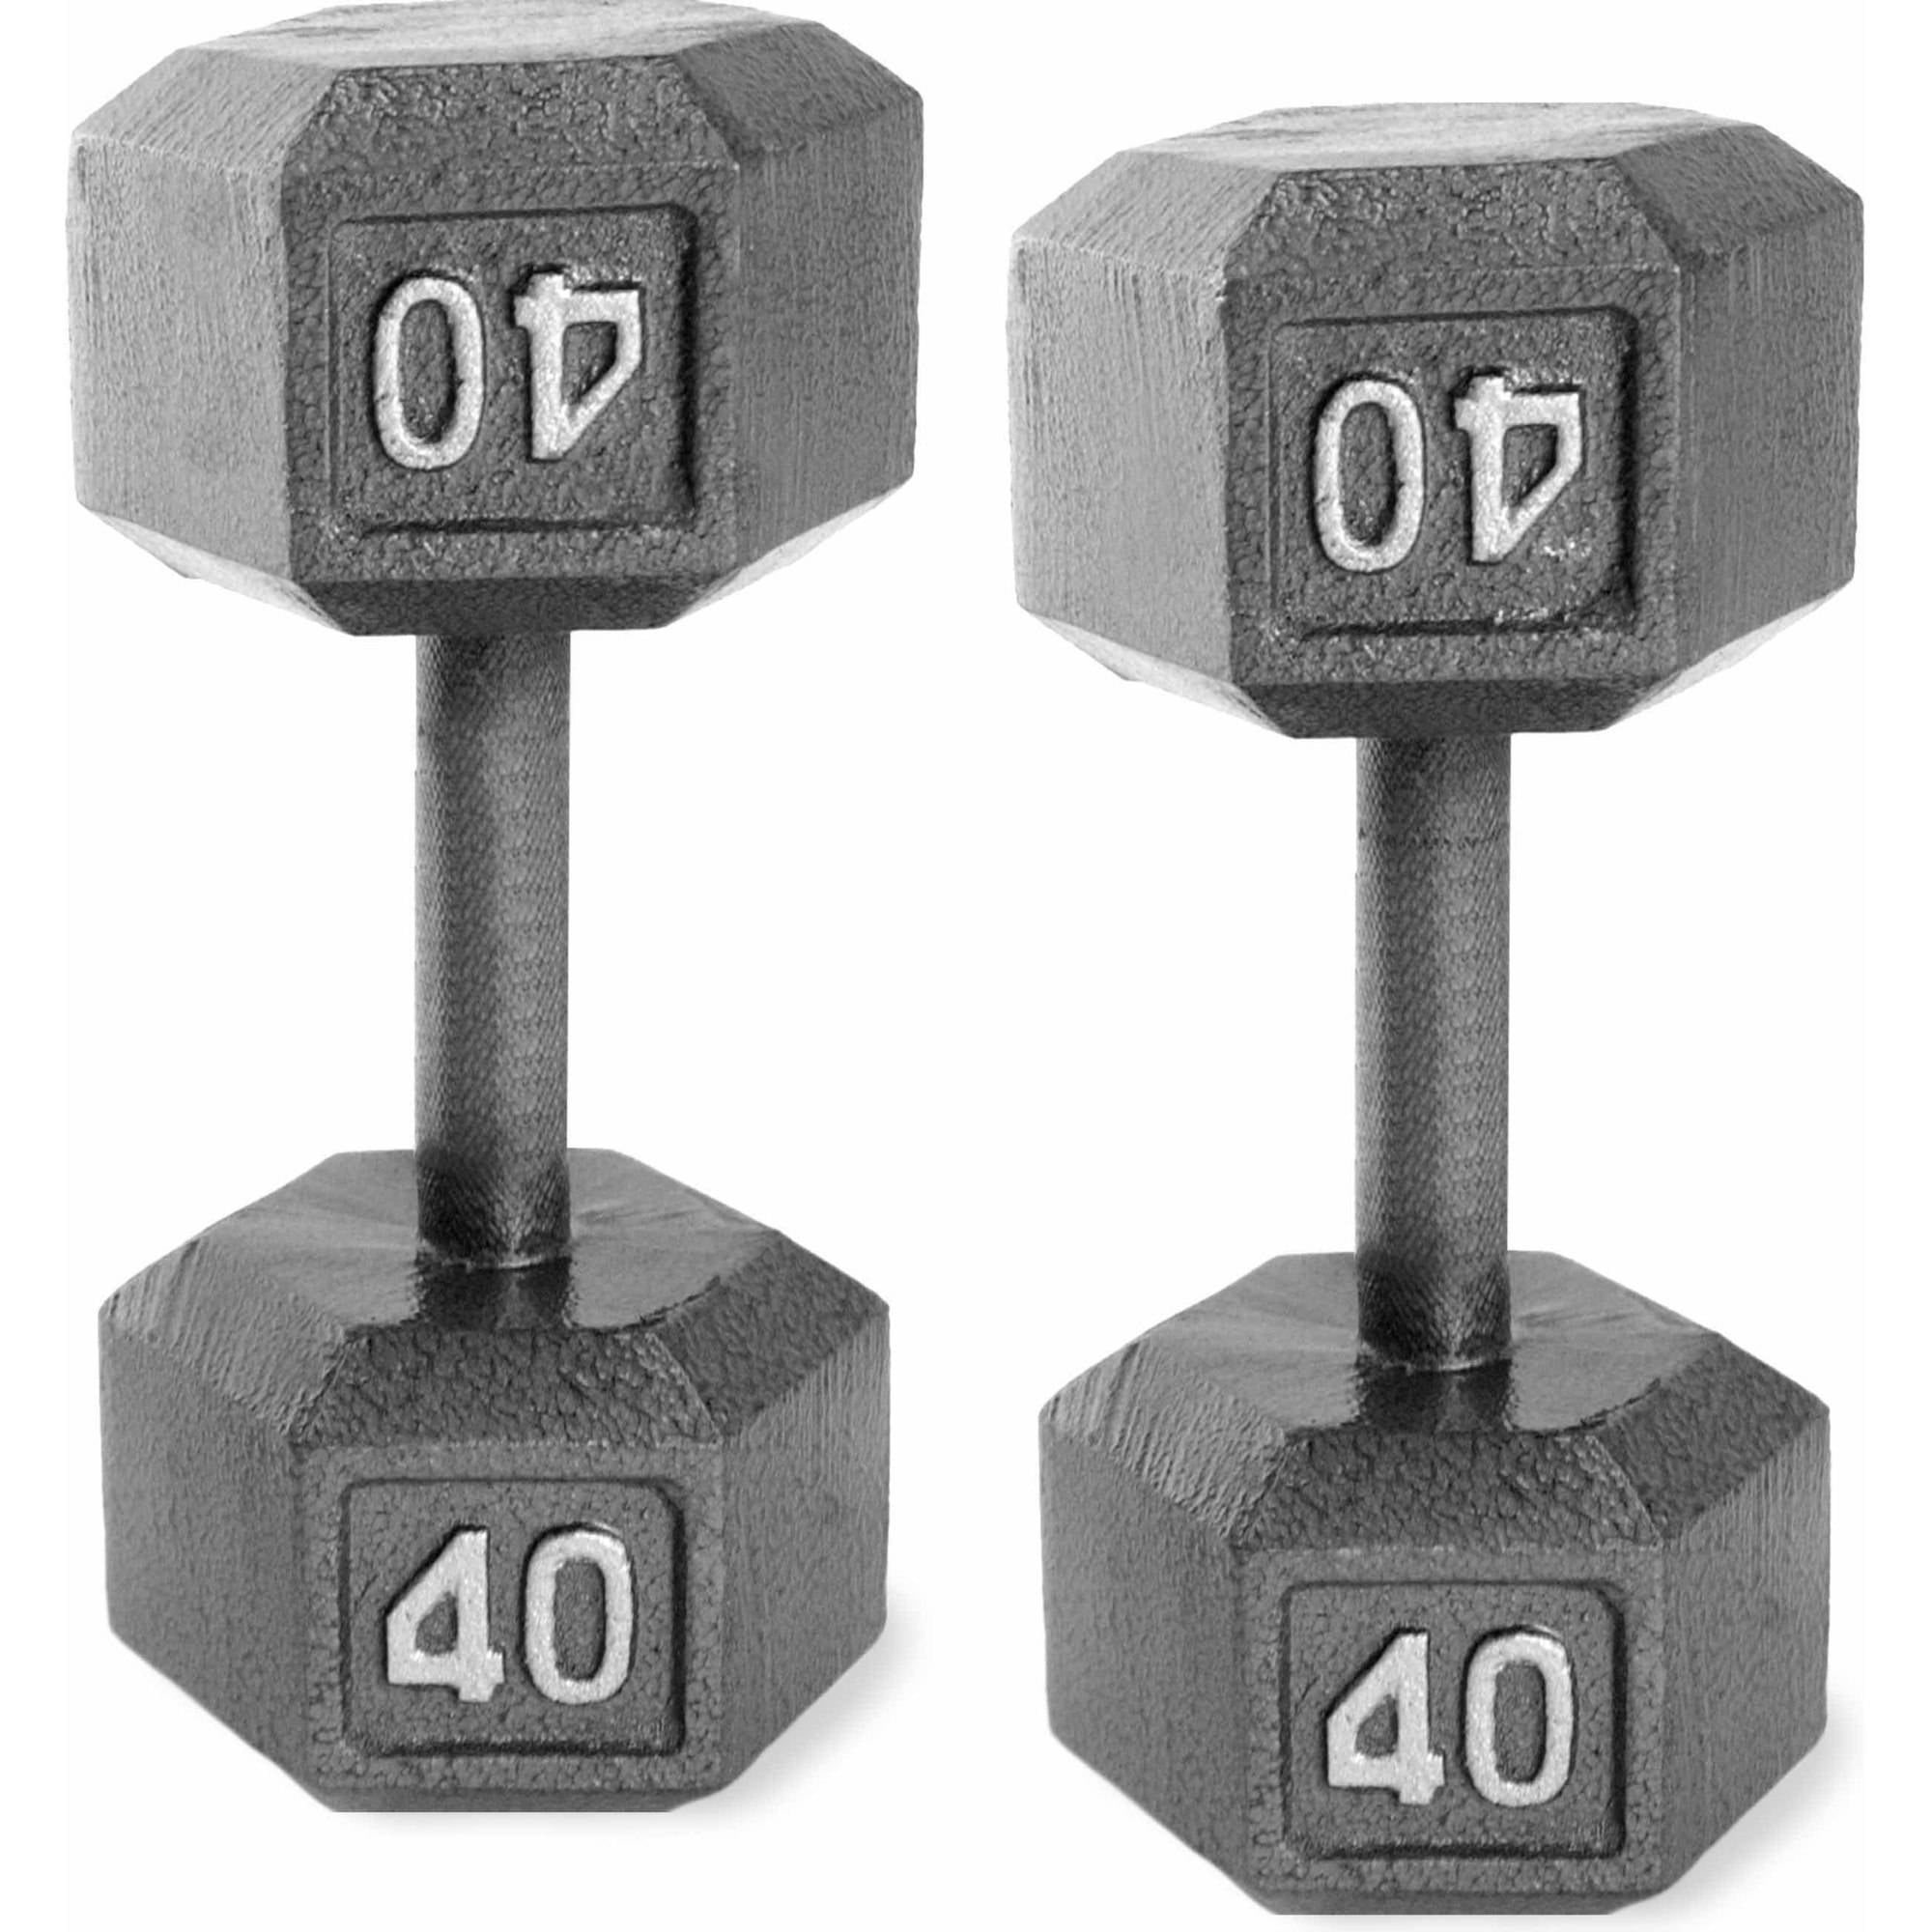 2 CAP Hex Dumbbells Barbells Free Weights 40 lb Pair 80 lbs Set Home Gym Fitness 